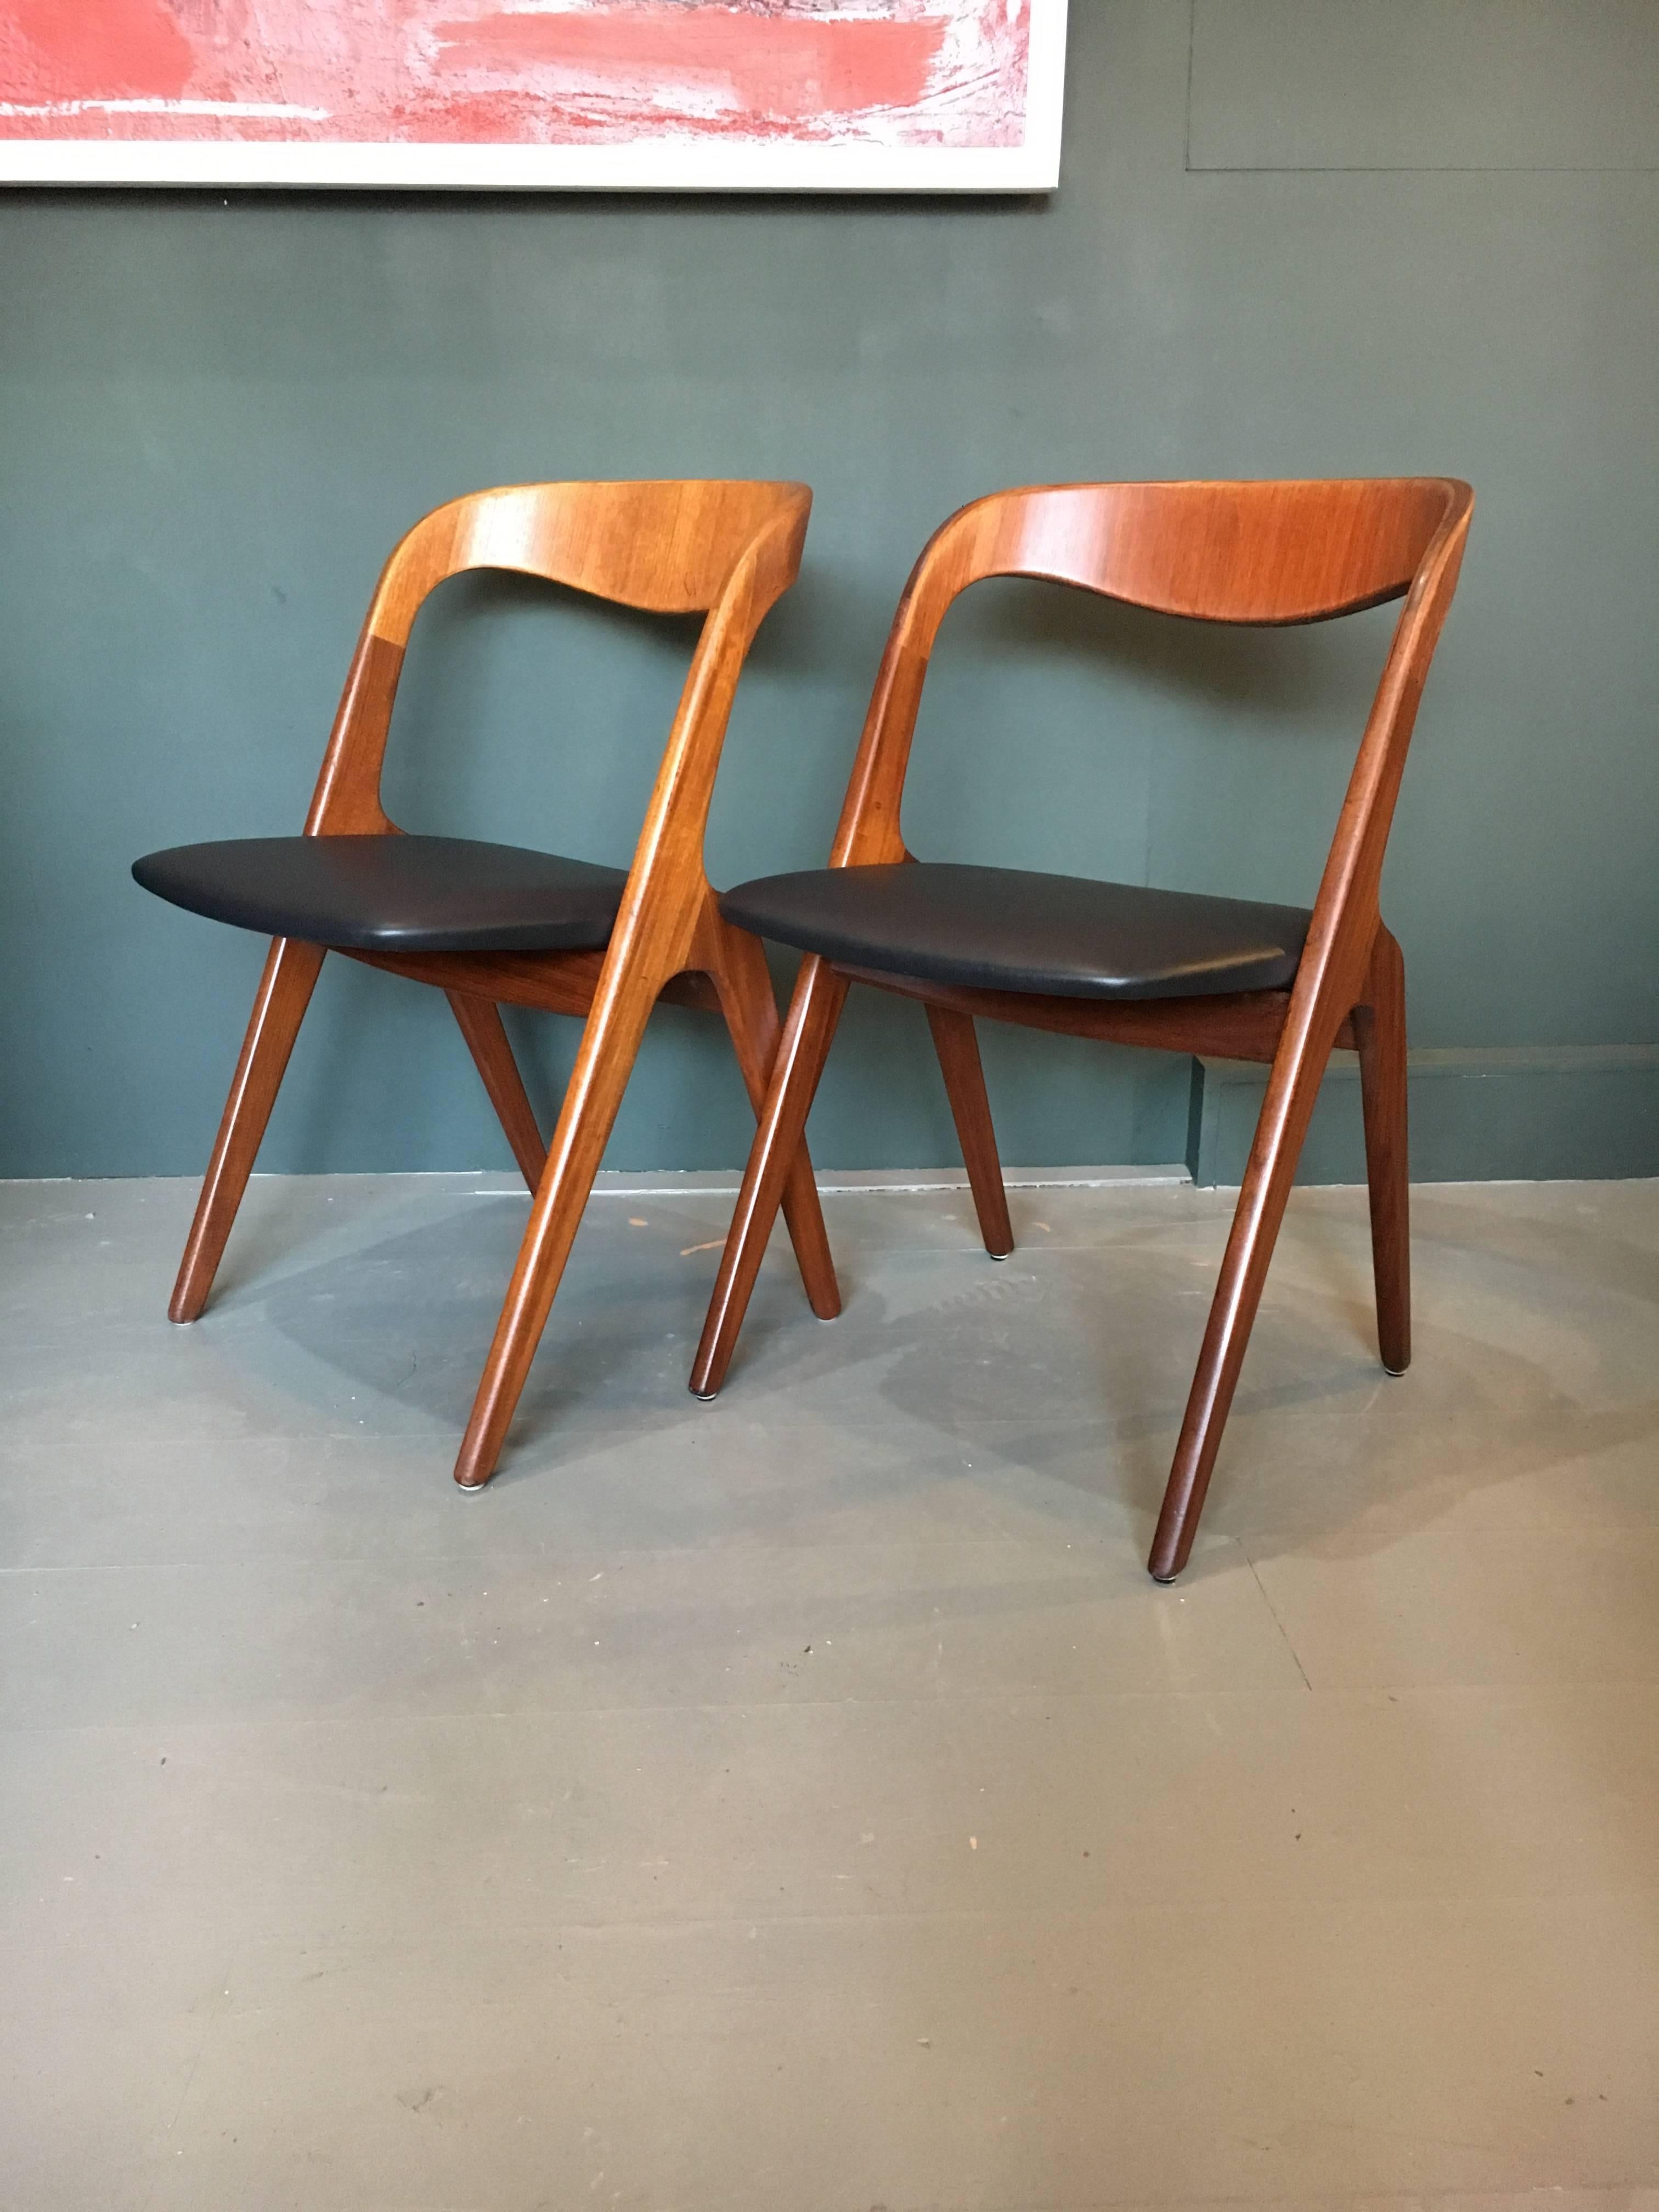 A set of ten teak dining chairs designed by Johannes Andersen for Vamo Sonderborg. Model ‘Sonja’ produced in Denmark, circa 1960. Refurbished frames with professionally reupholstered seats of Magpie black leather. Unique midcentury design profile by